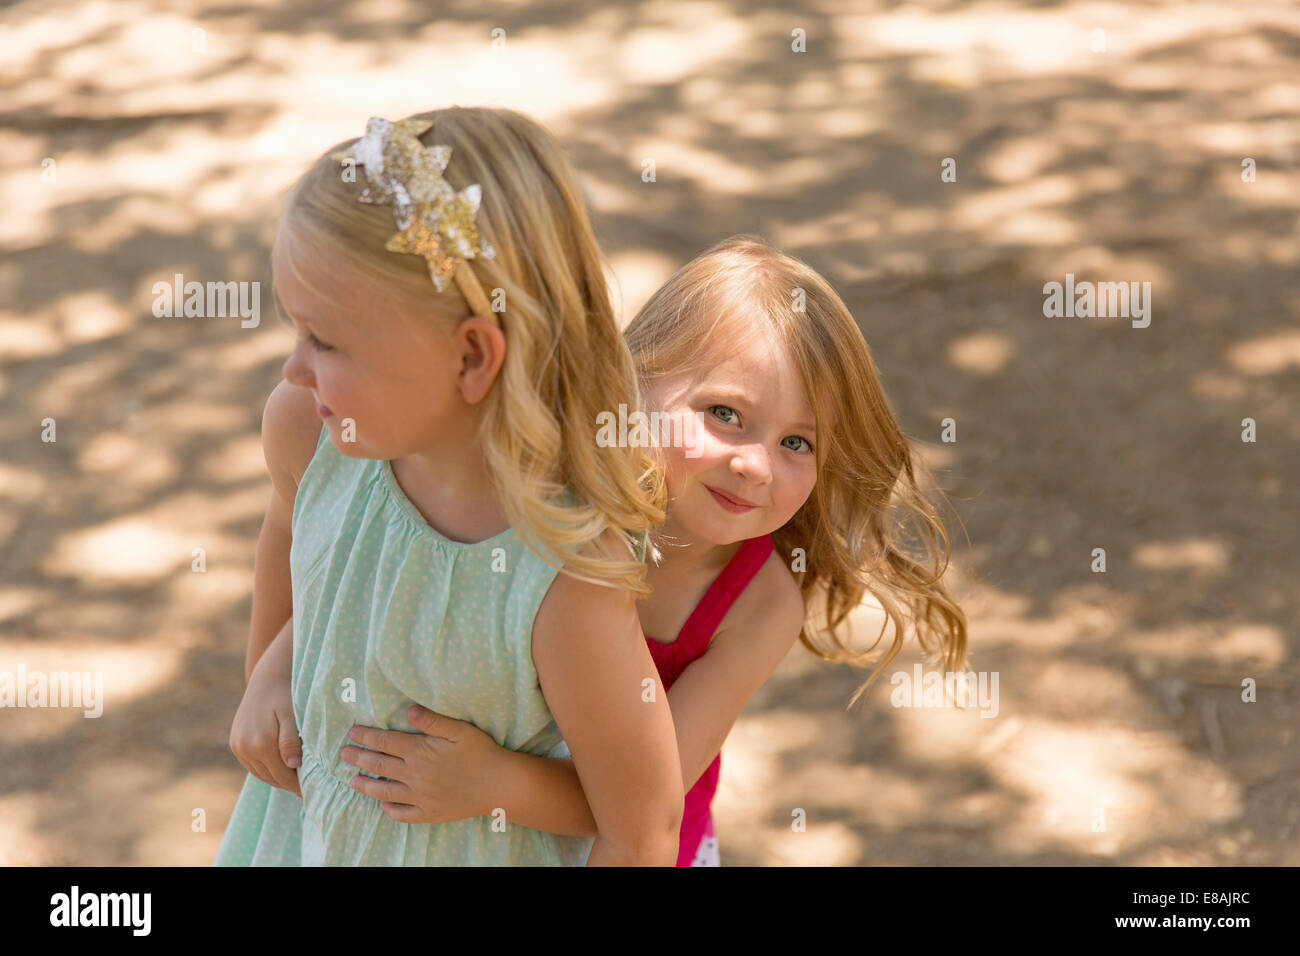 Young girl hiding behind sister in park Stock Photo